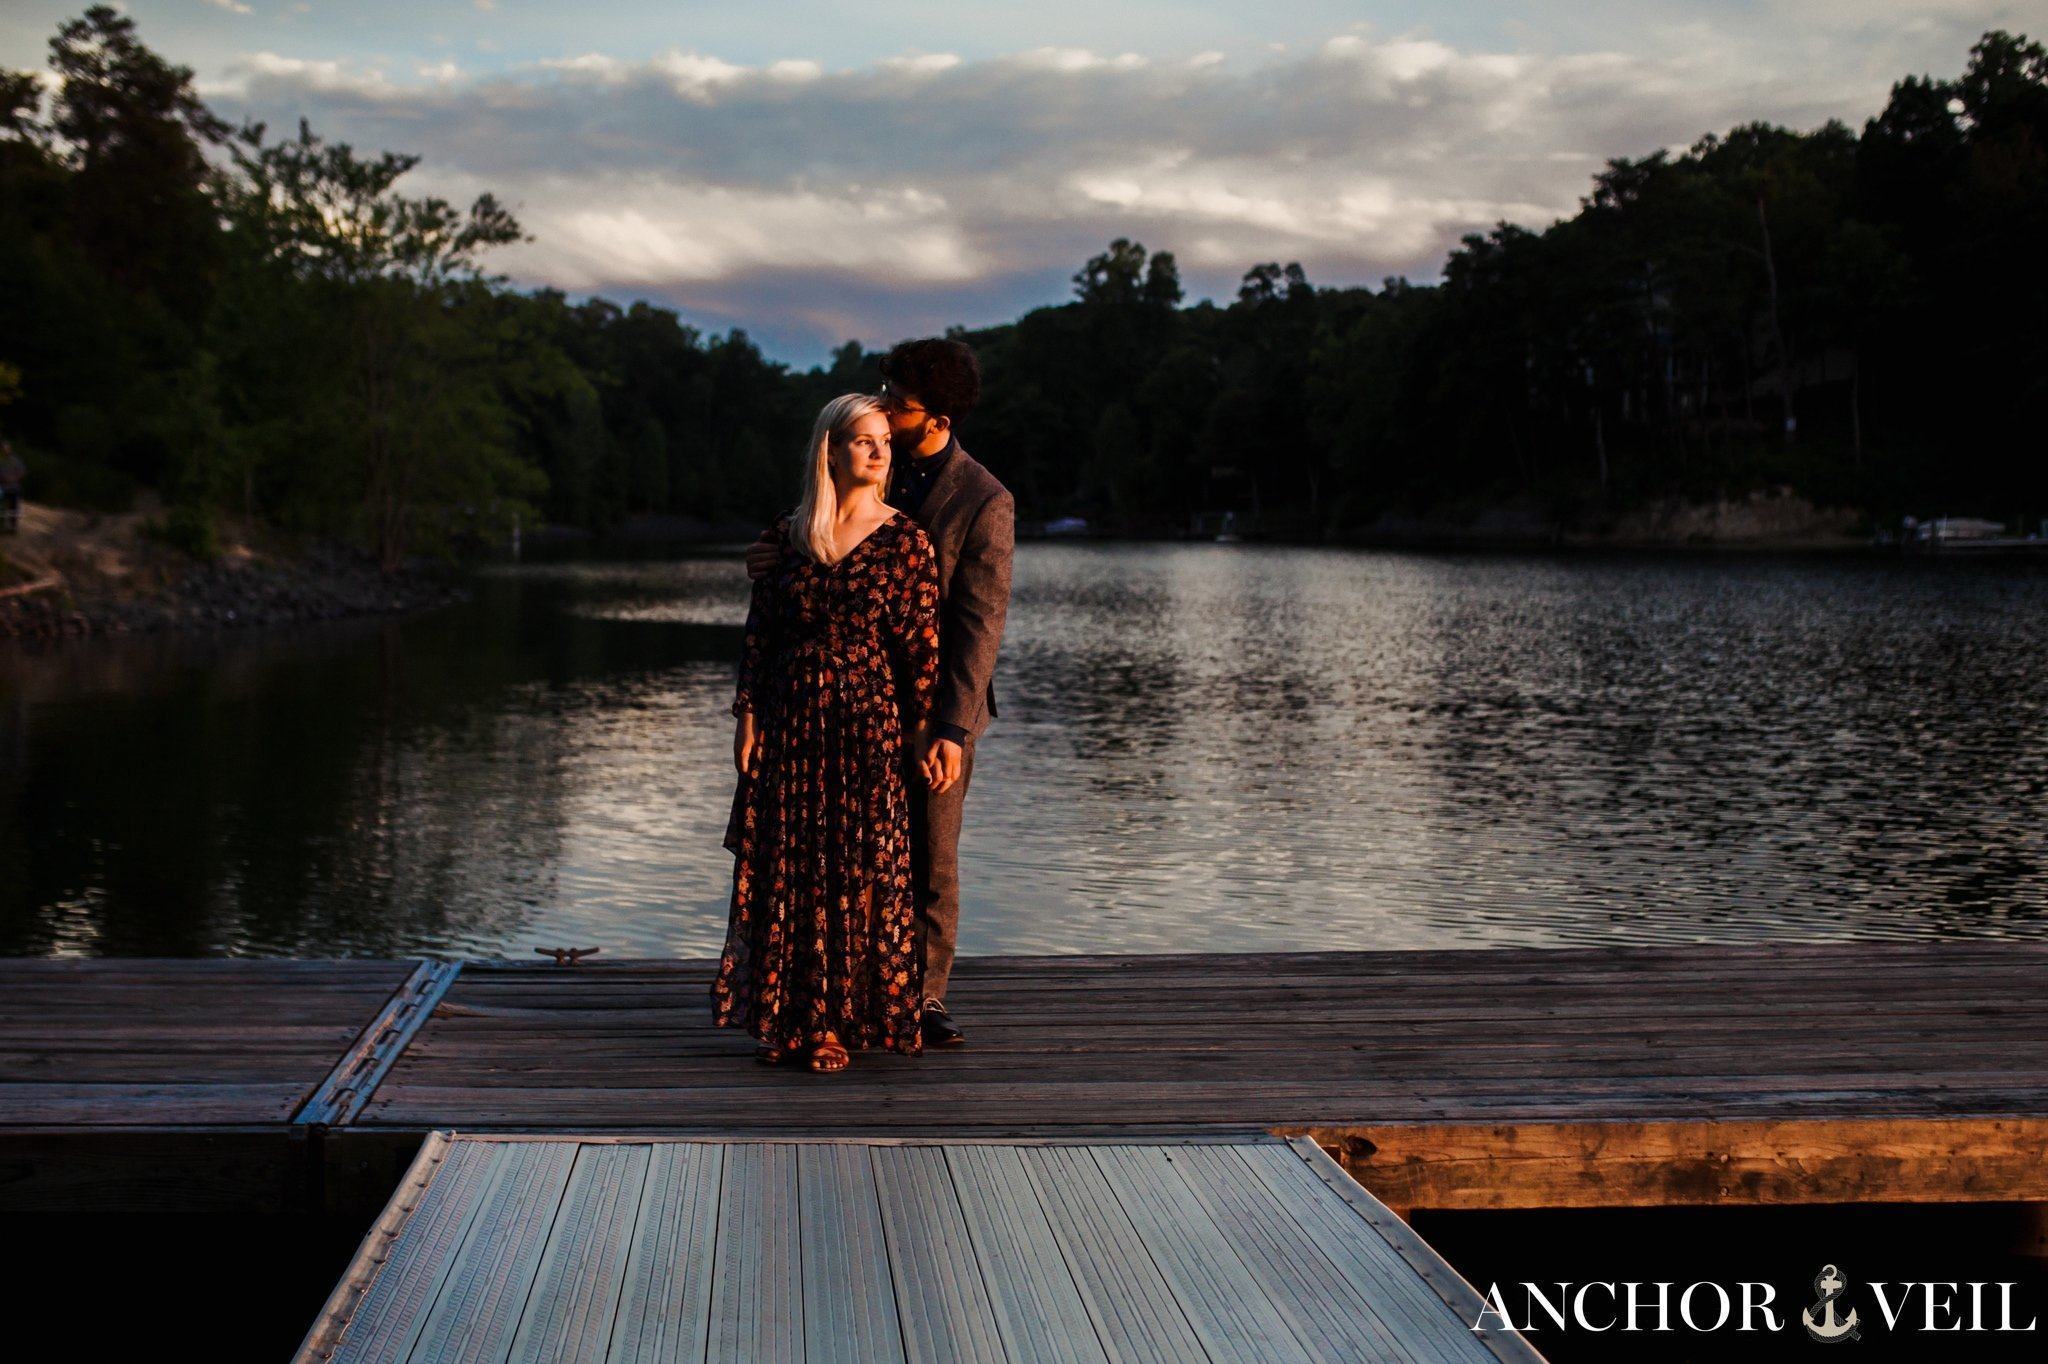 standing on the dock in front of the water at sunset during their McDowell Nature Preserve Engagement Session